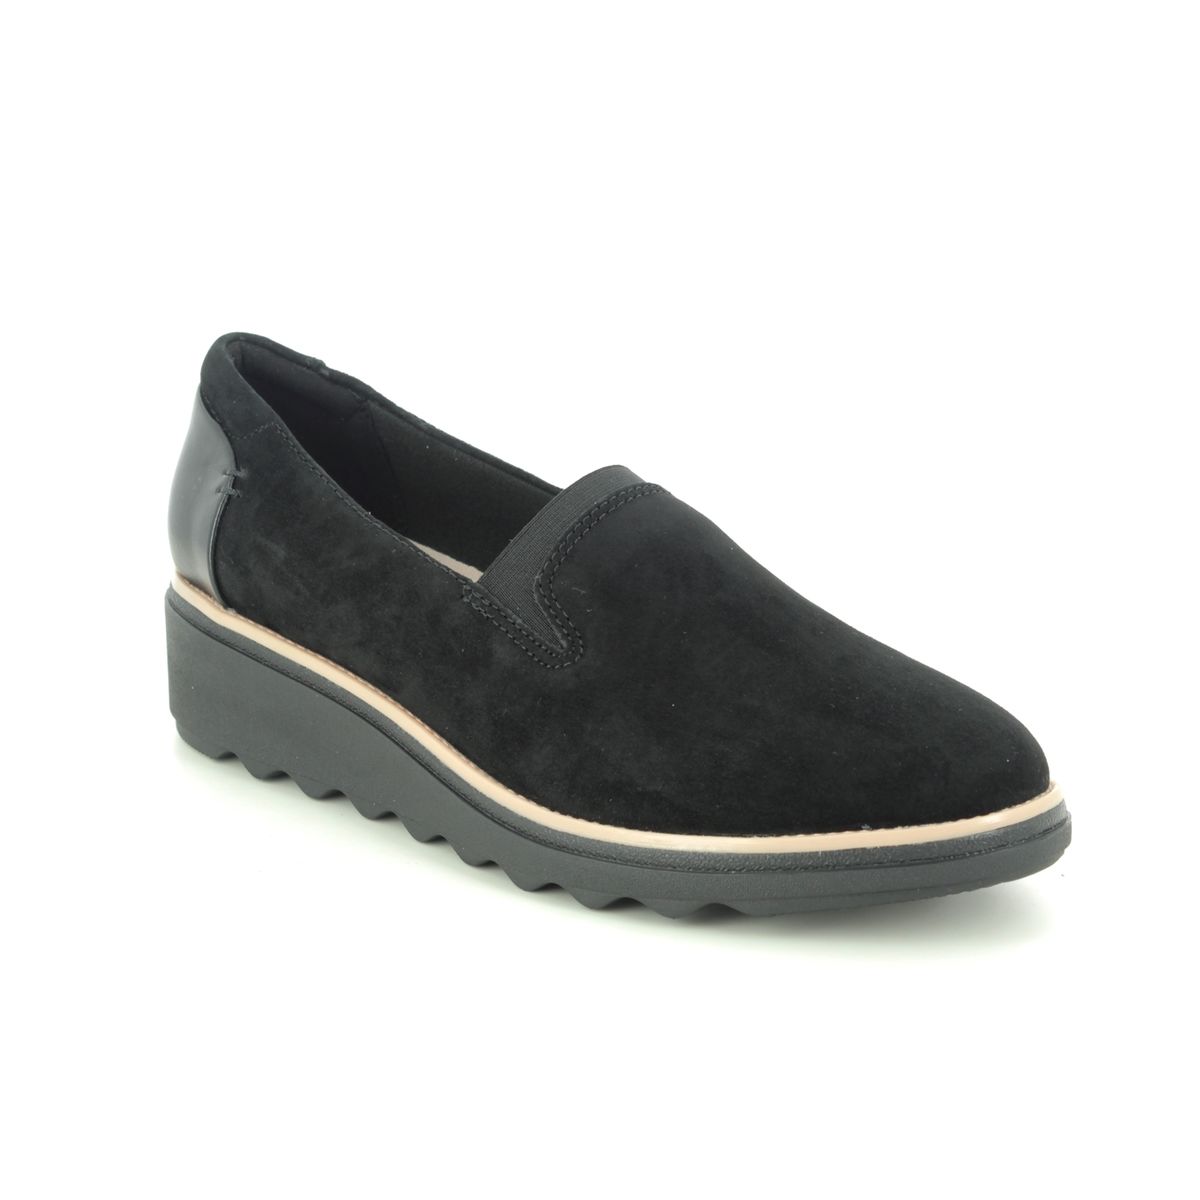 clarks sharon shoes